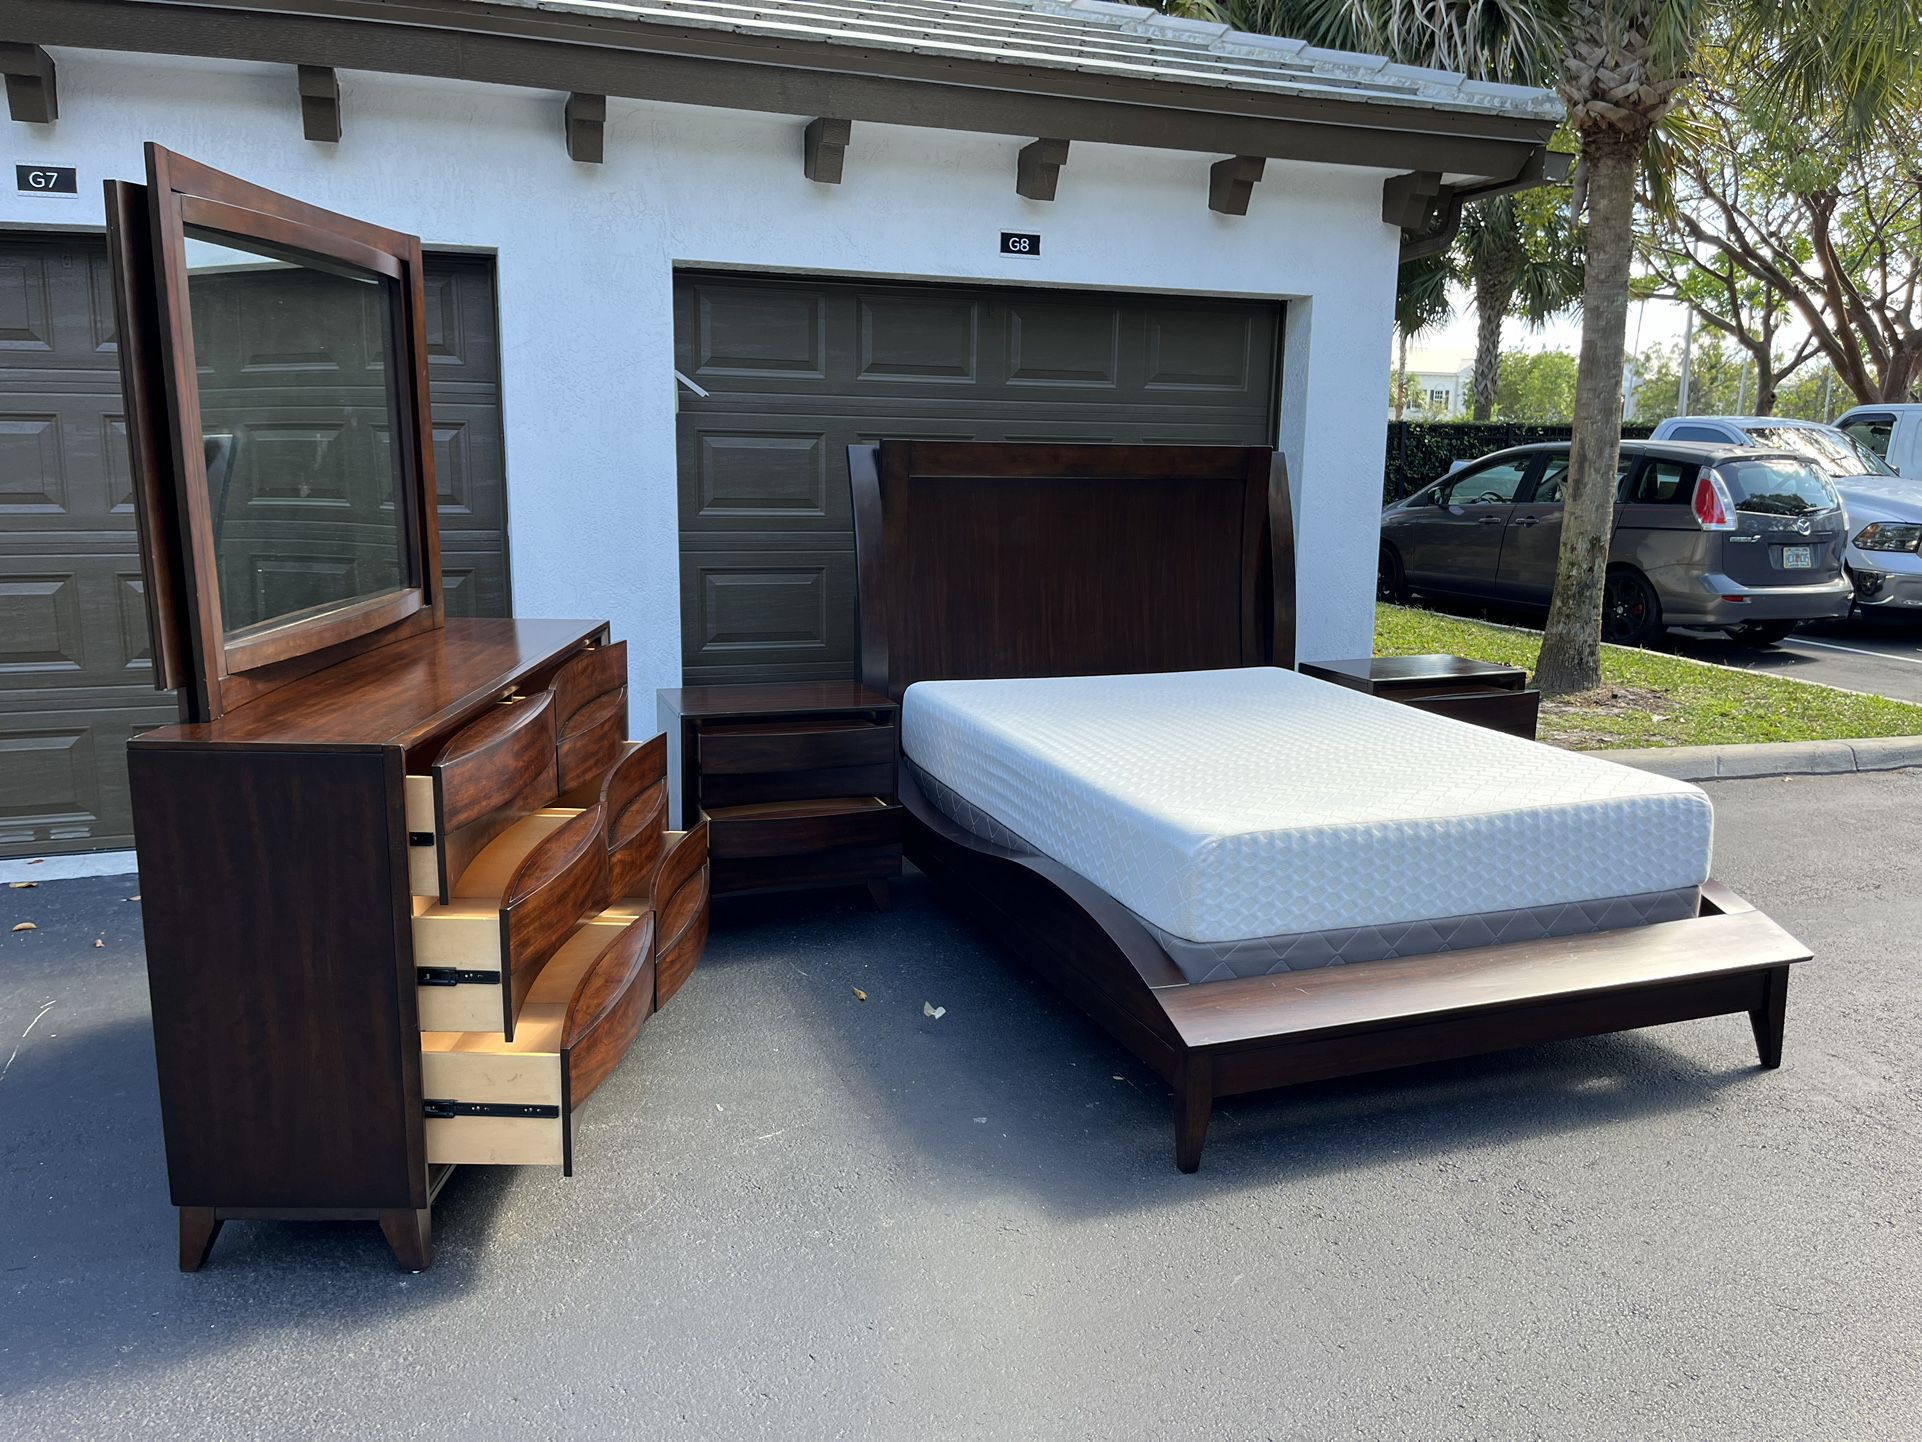 BEAUTIFUL SET QUEEN W BOX + MATTRESS / DRESSER W MIRROR & TWO NIGHTSTAND - BY AMERICAN SIGNATURE - SOLID WOOD - EXCELLENT CONDITION - Delivery Availab